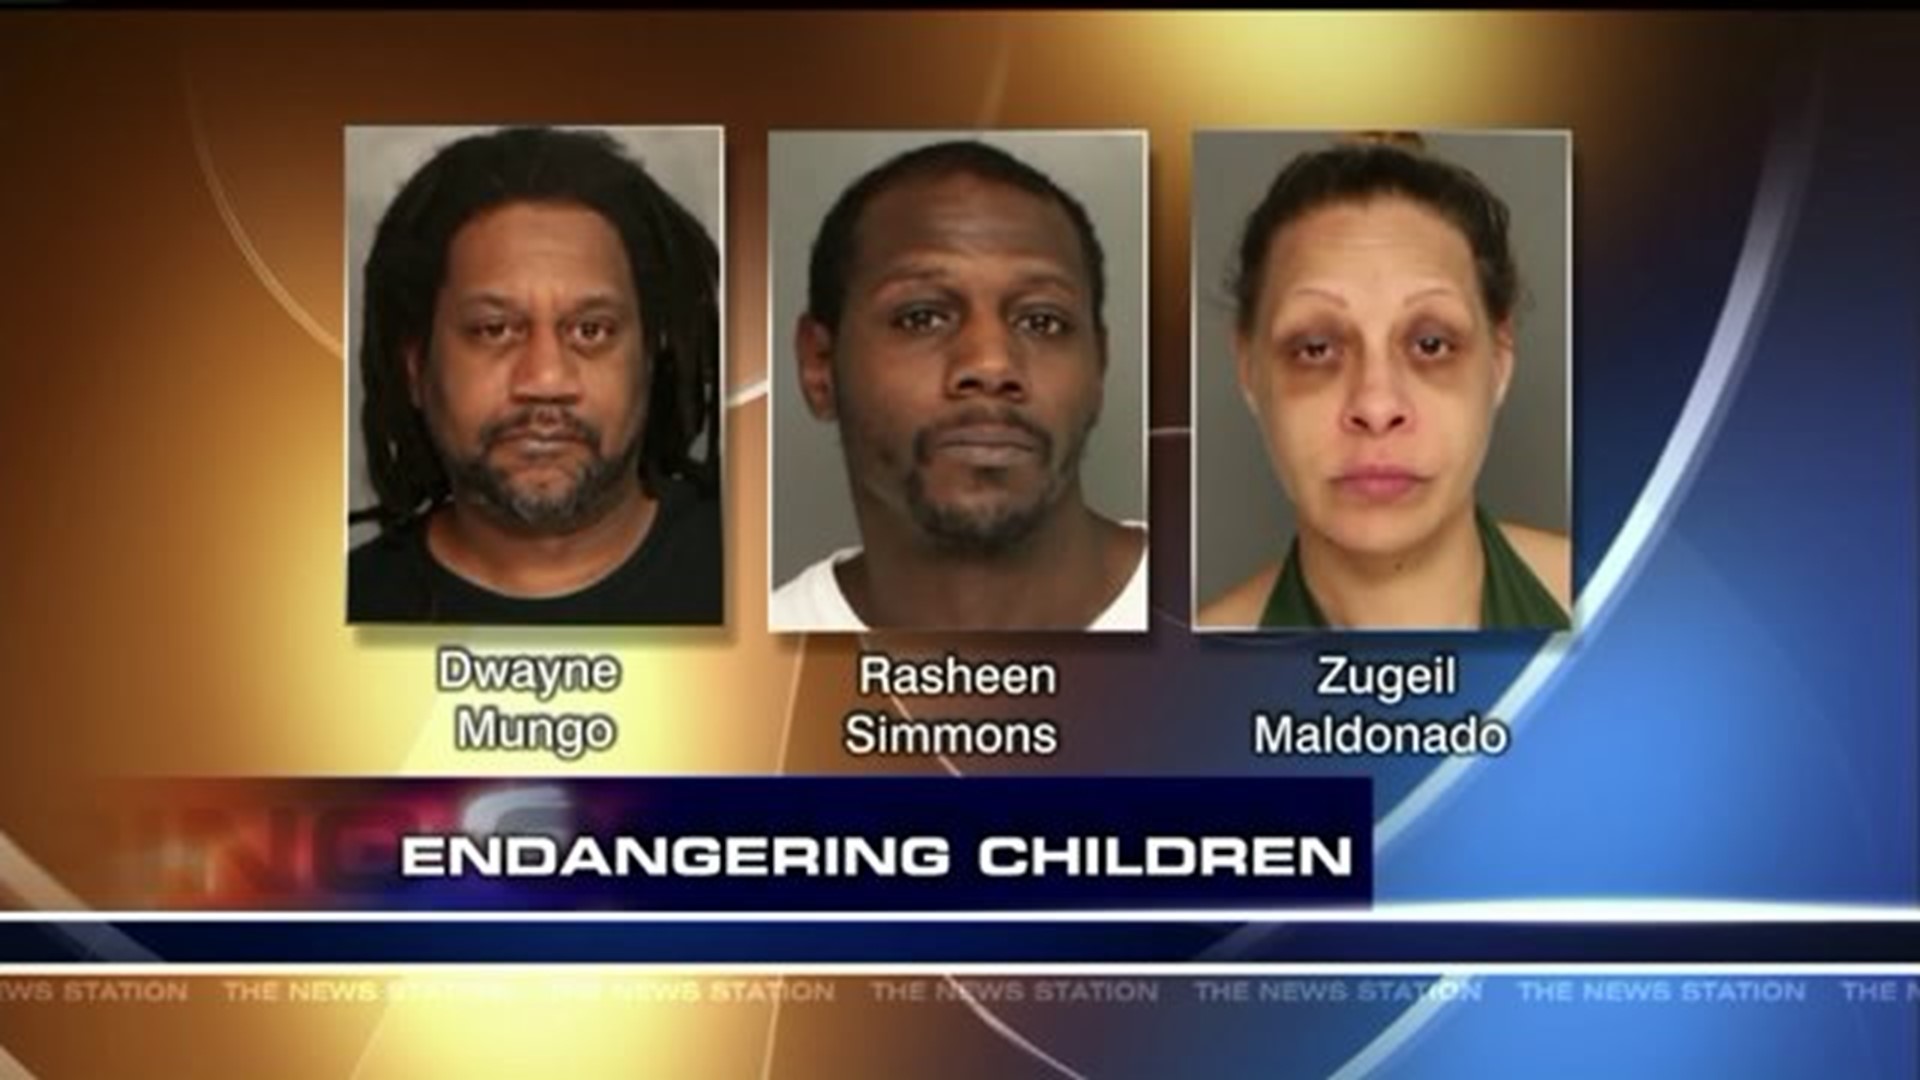 Police Serve Search Warrant, Find 8 Children in Filthy Home